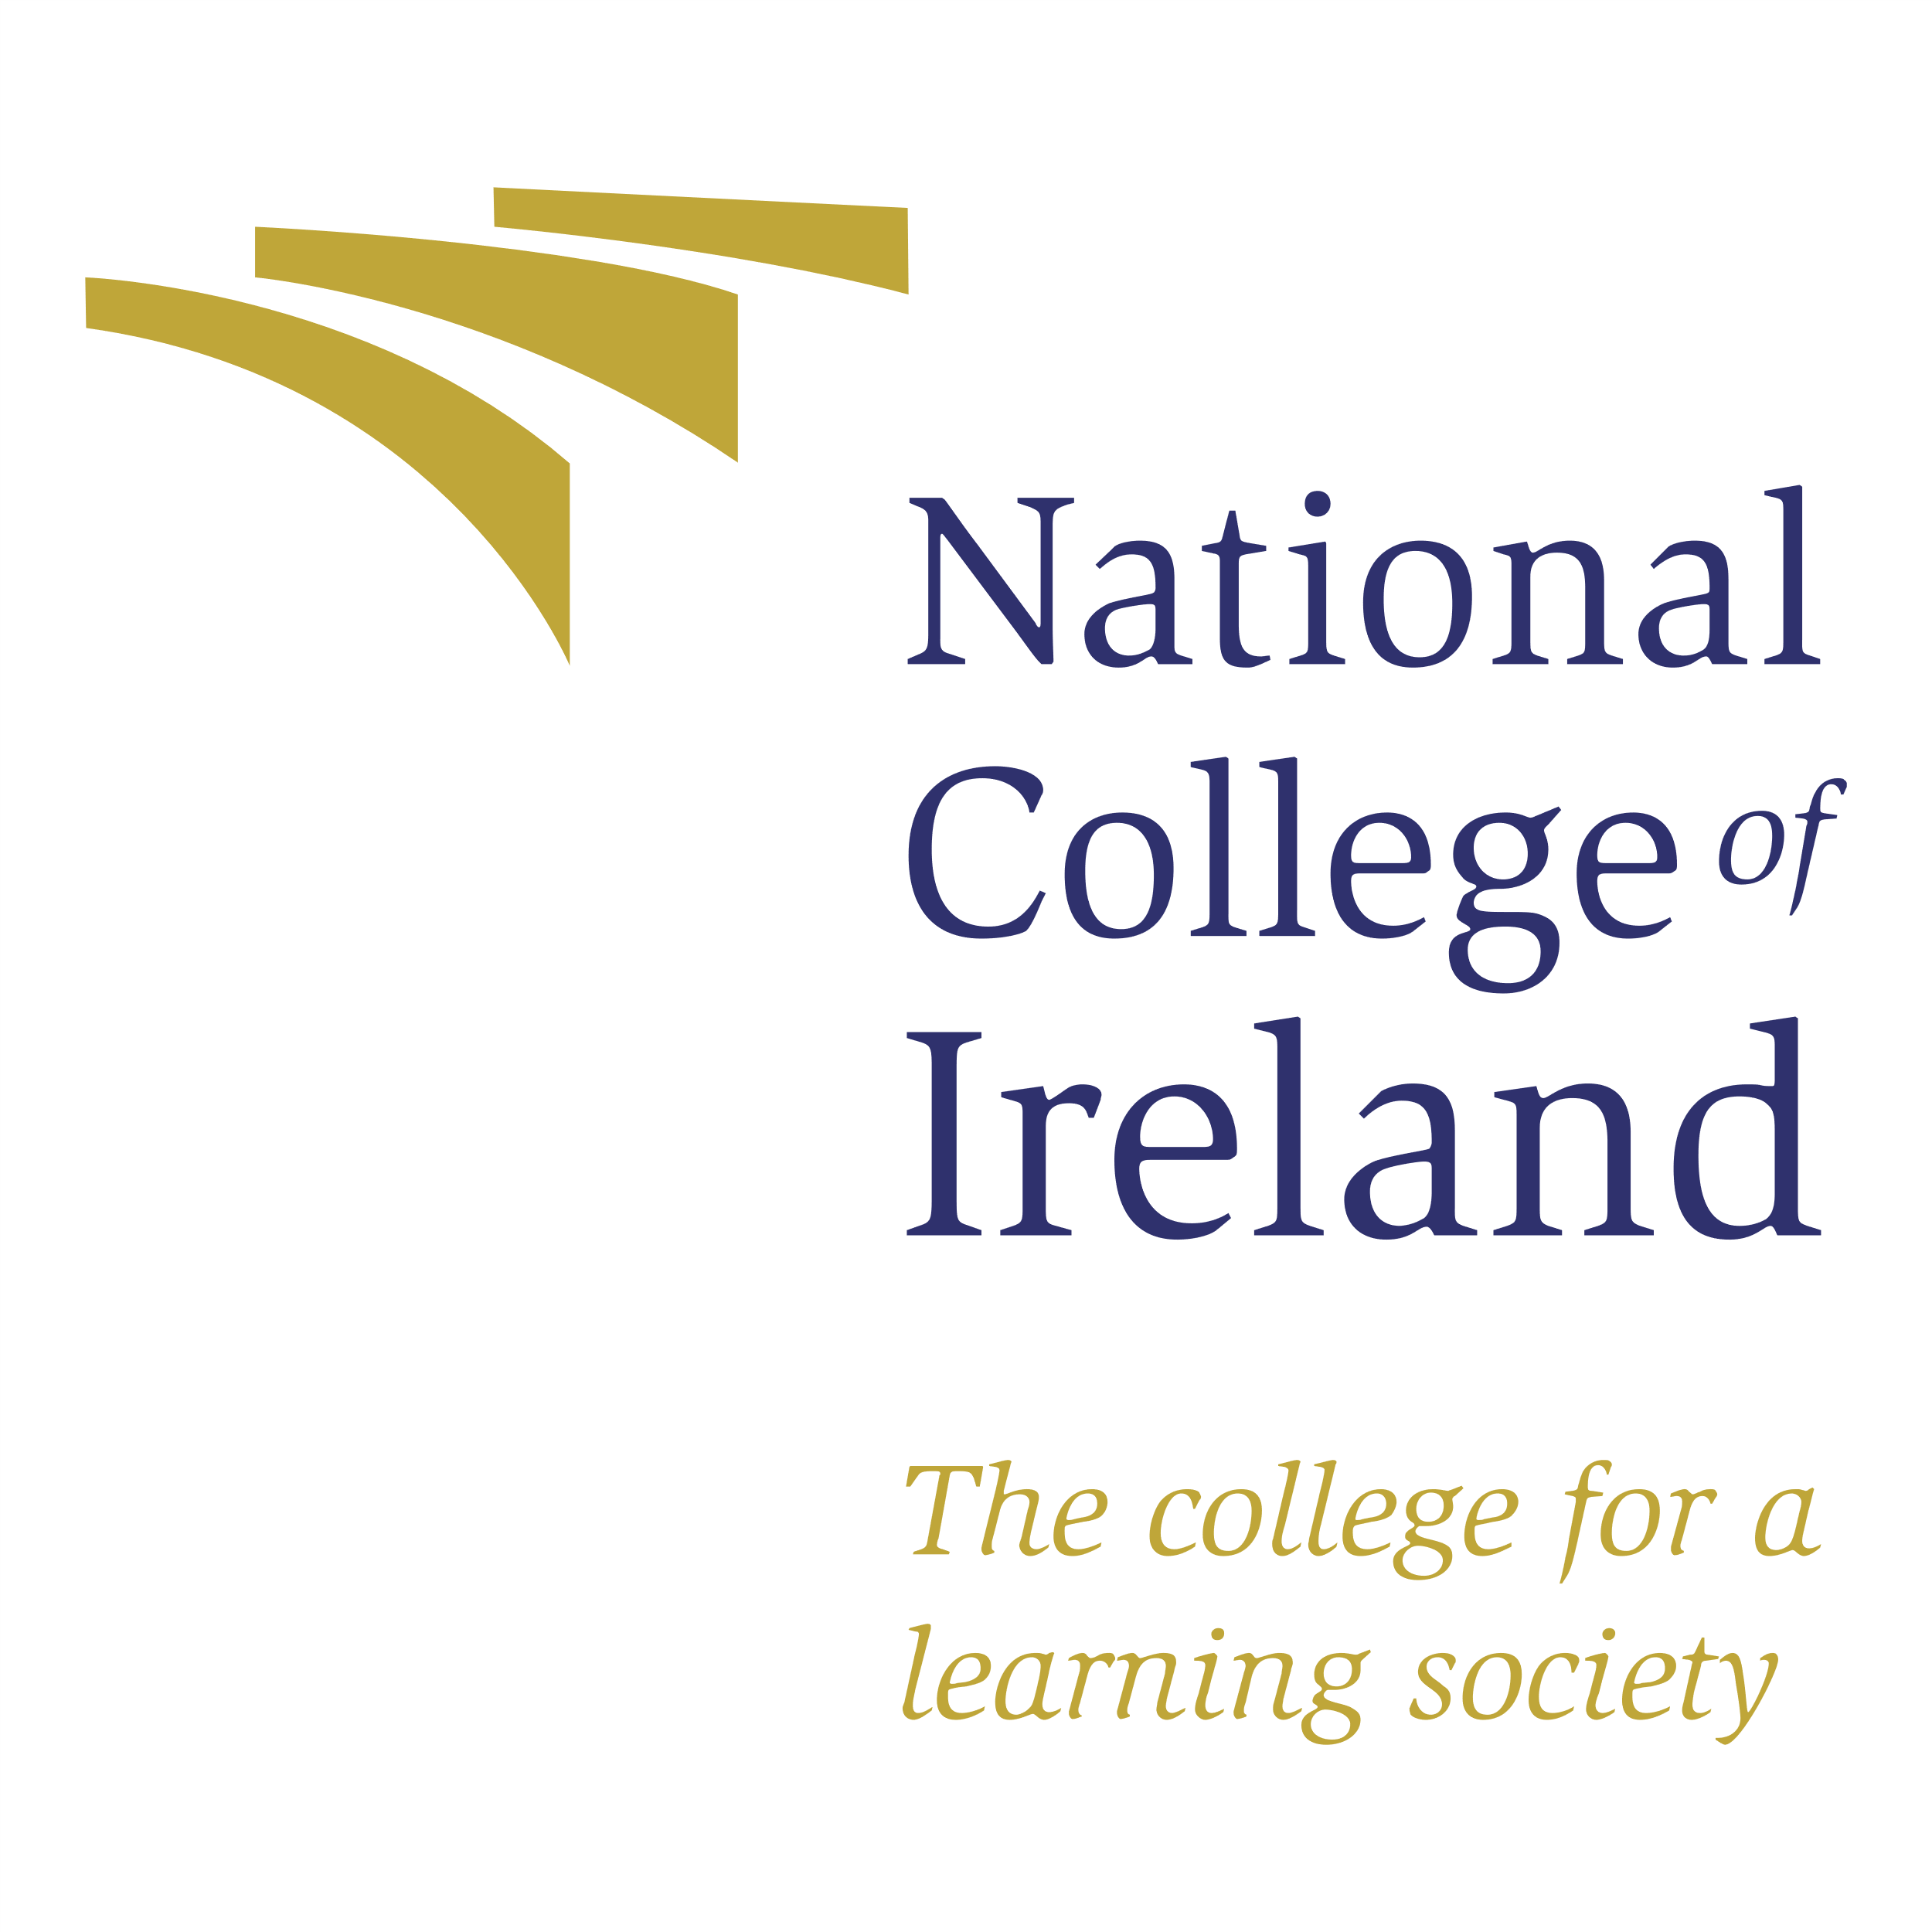 The National College of Ireland logo